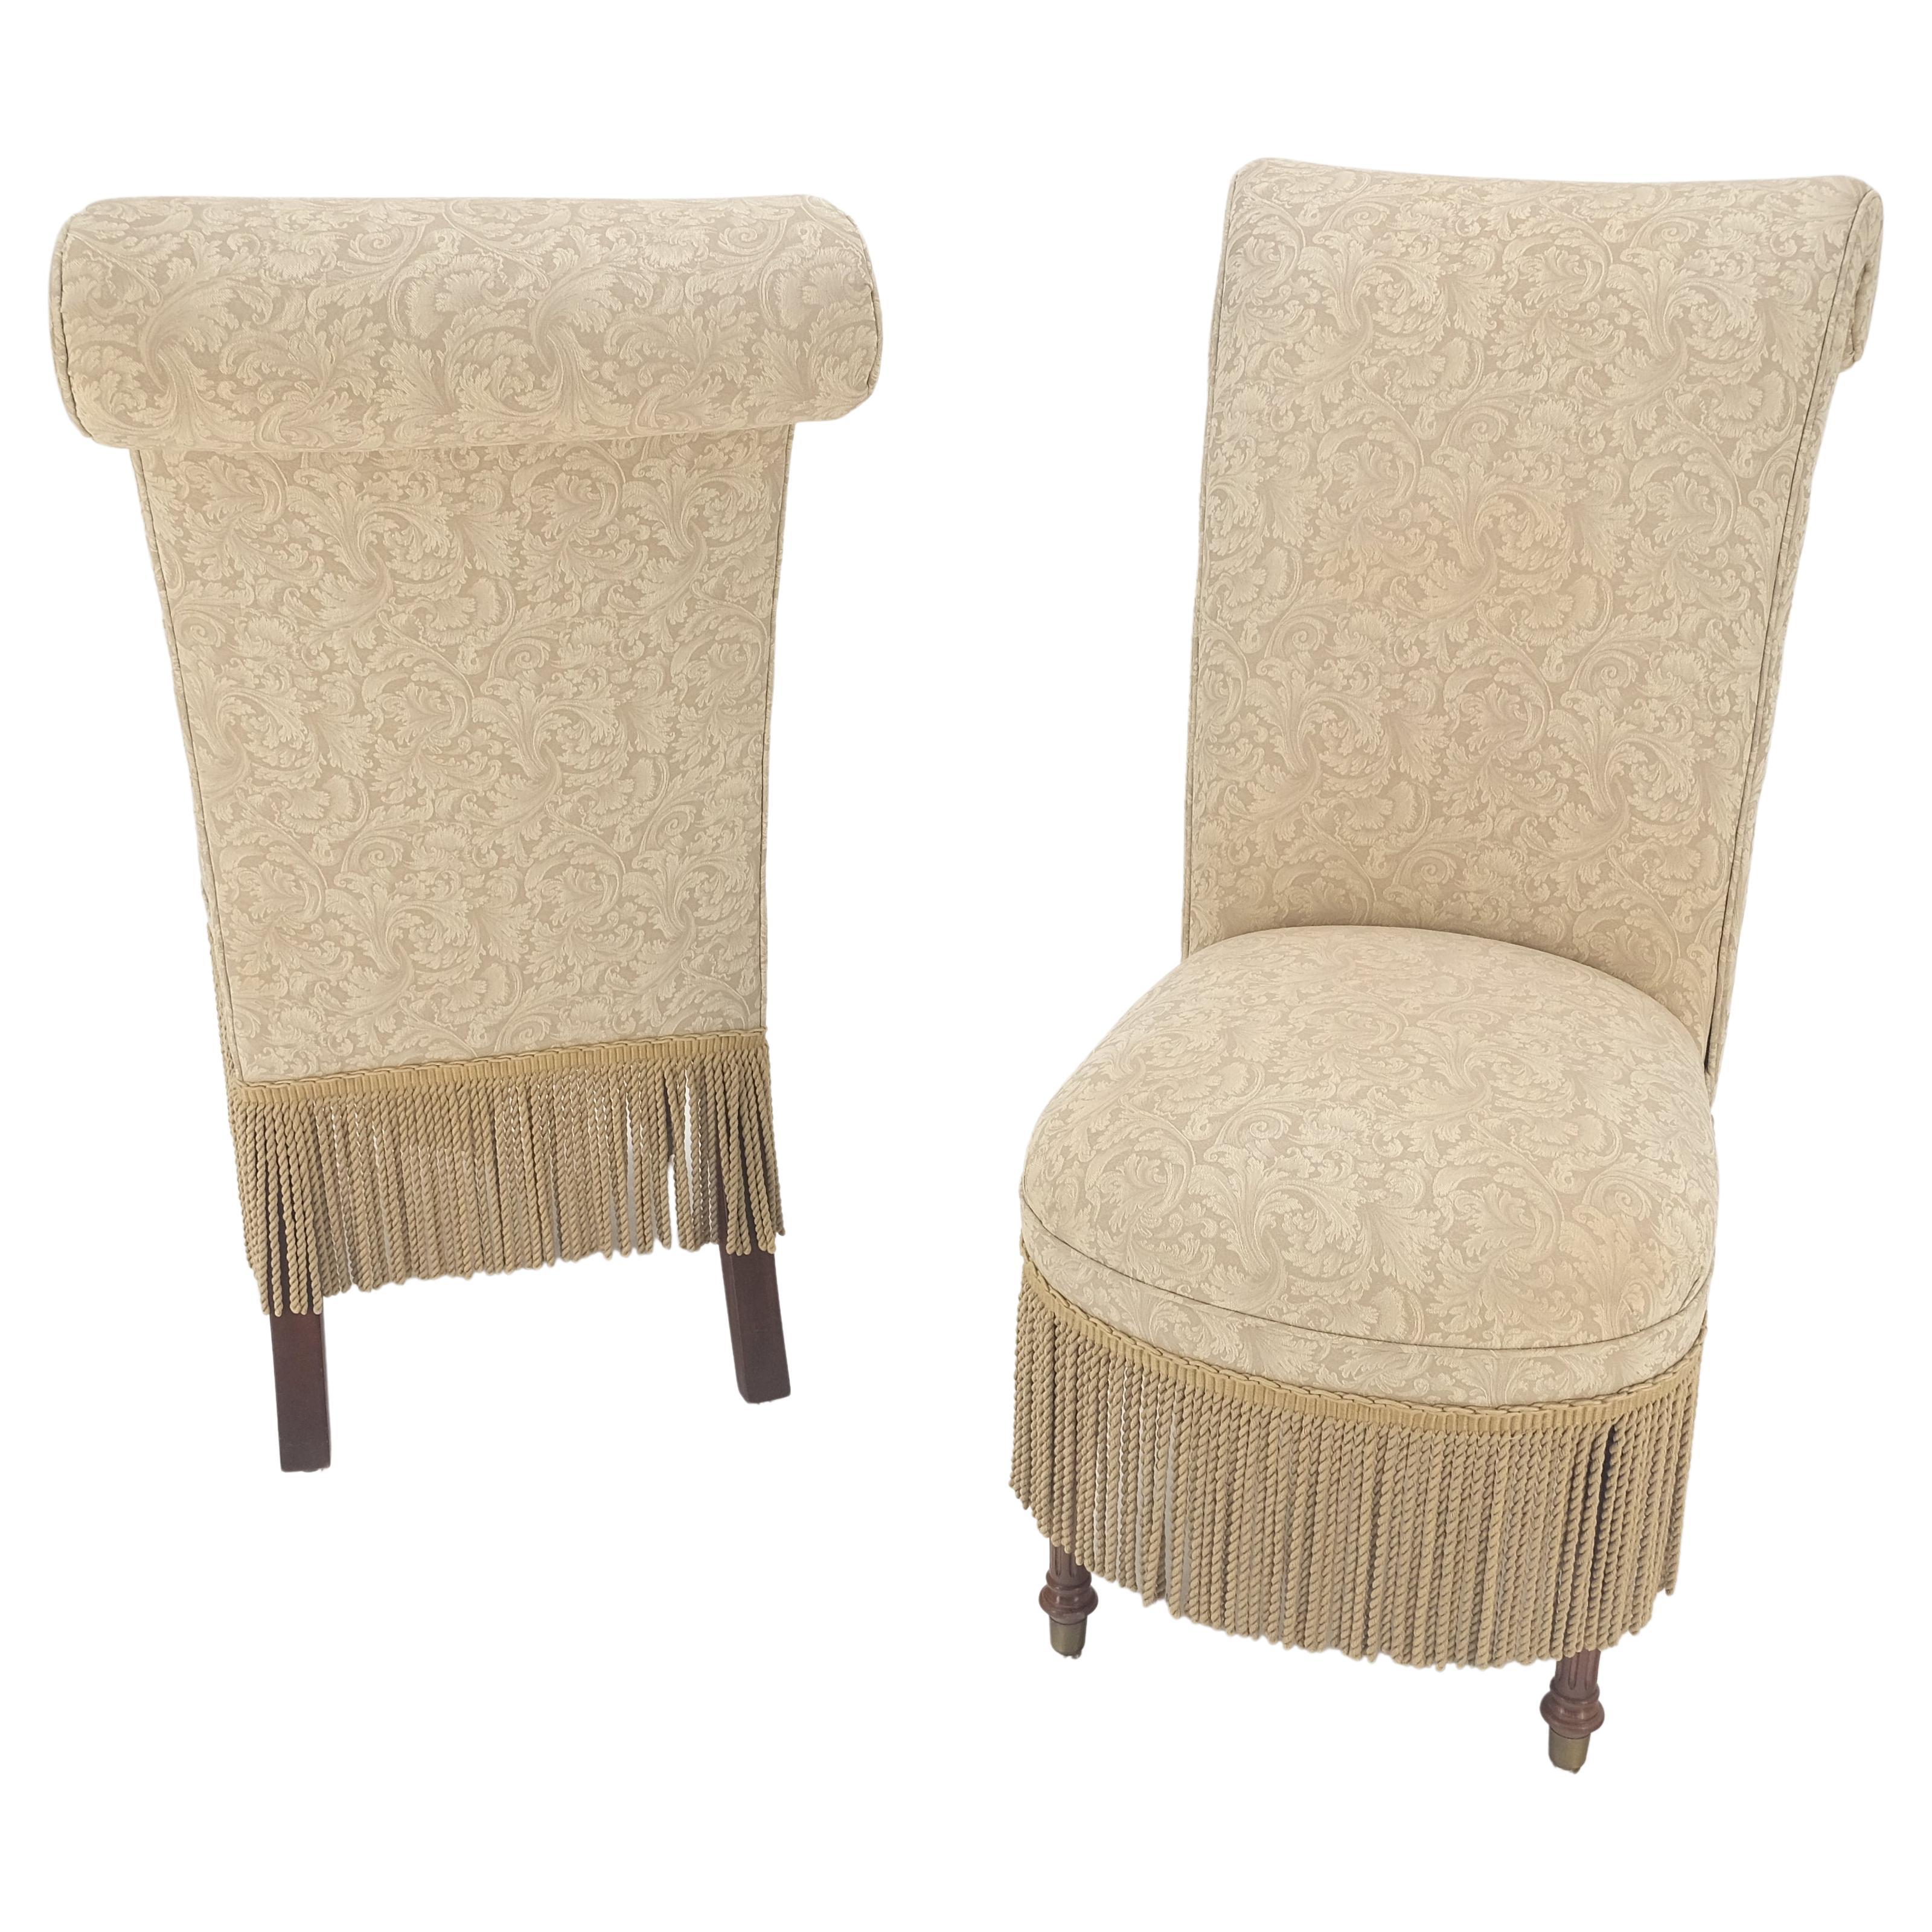 Tall Back Pair Decorative Turned Mahogany Legs Tassels Decorated Fireside Slip Lounge Chairs MINT!
